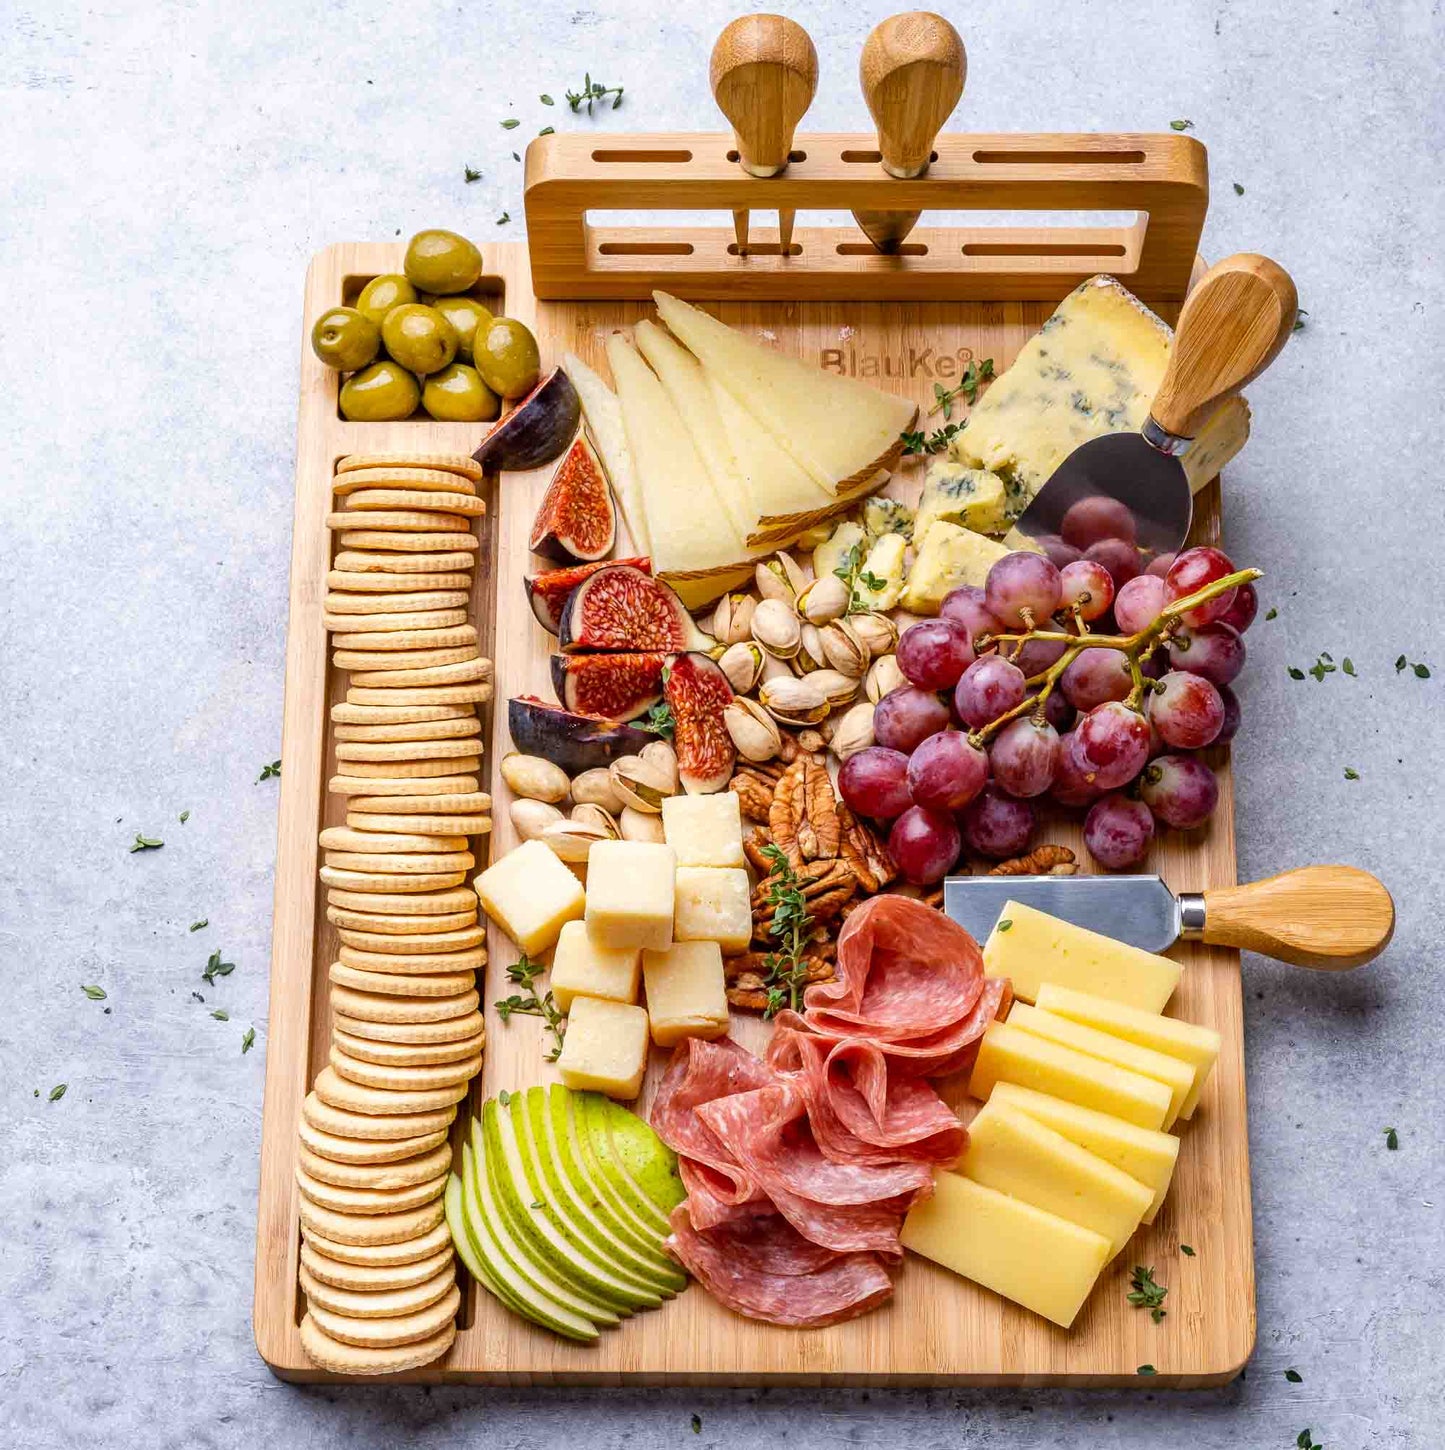 Bamboo Cheese Board and Knife Set - 14x11 inch Charcuterie Board with